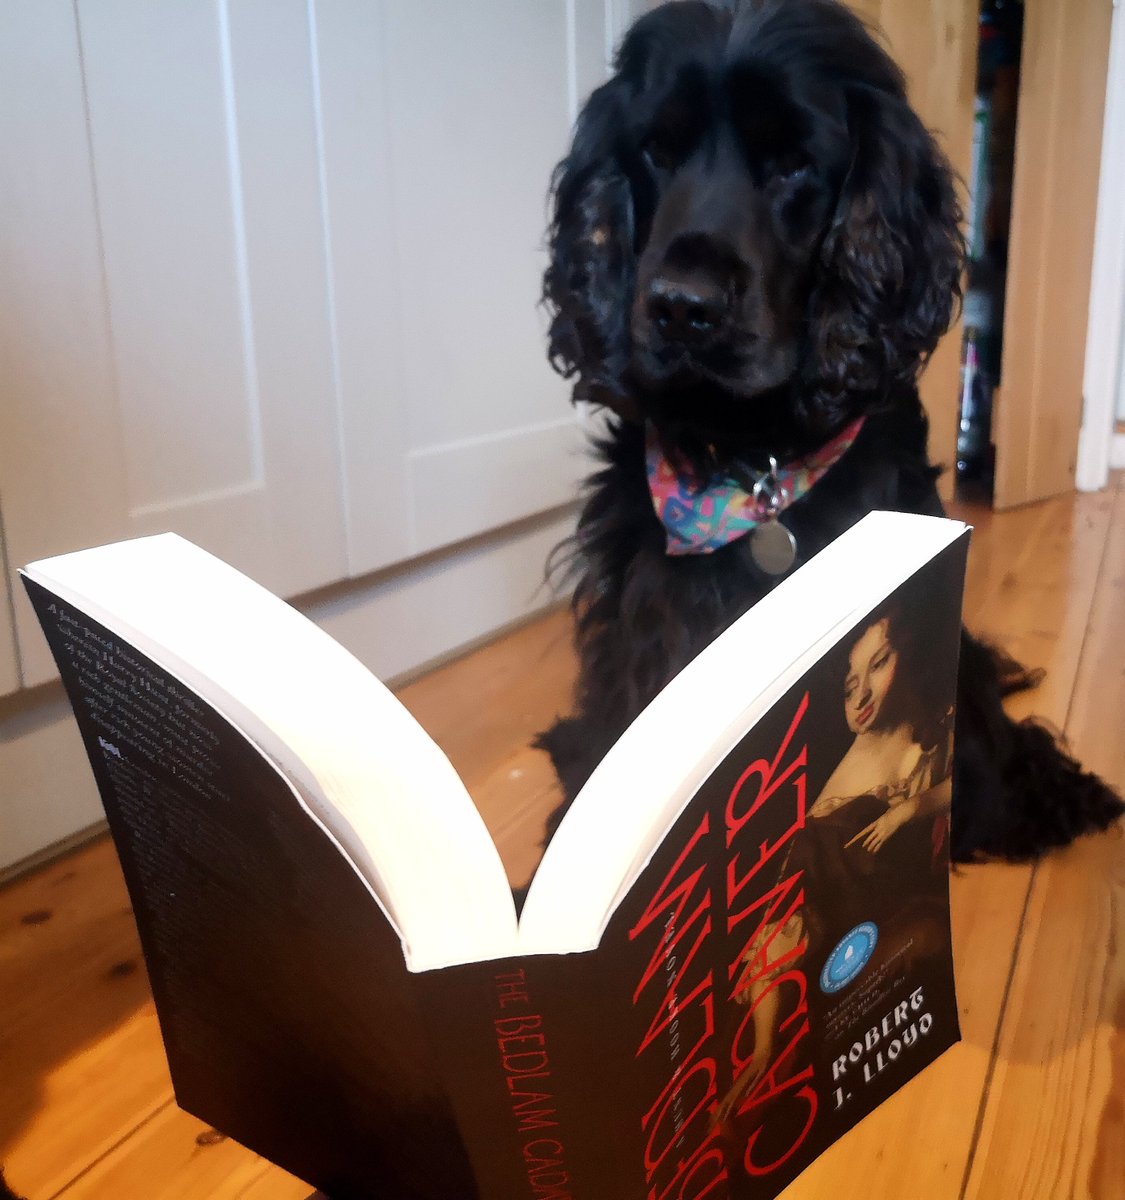 Picture of a cute dog actually reading The Bedlam Cadaver, or cynical marketing strategy? You decide! By the way, it's the last day of the Barnes & Noble 25% off pre-orders offer, available here. barnesandnoble.com/w/the-bedlam-c…